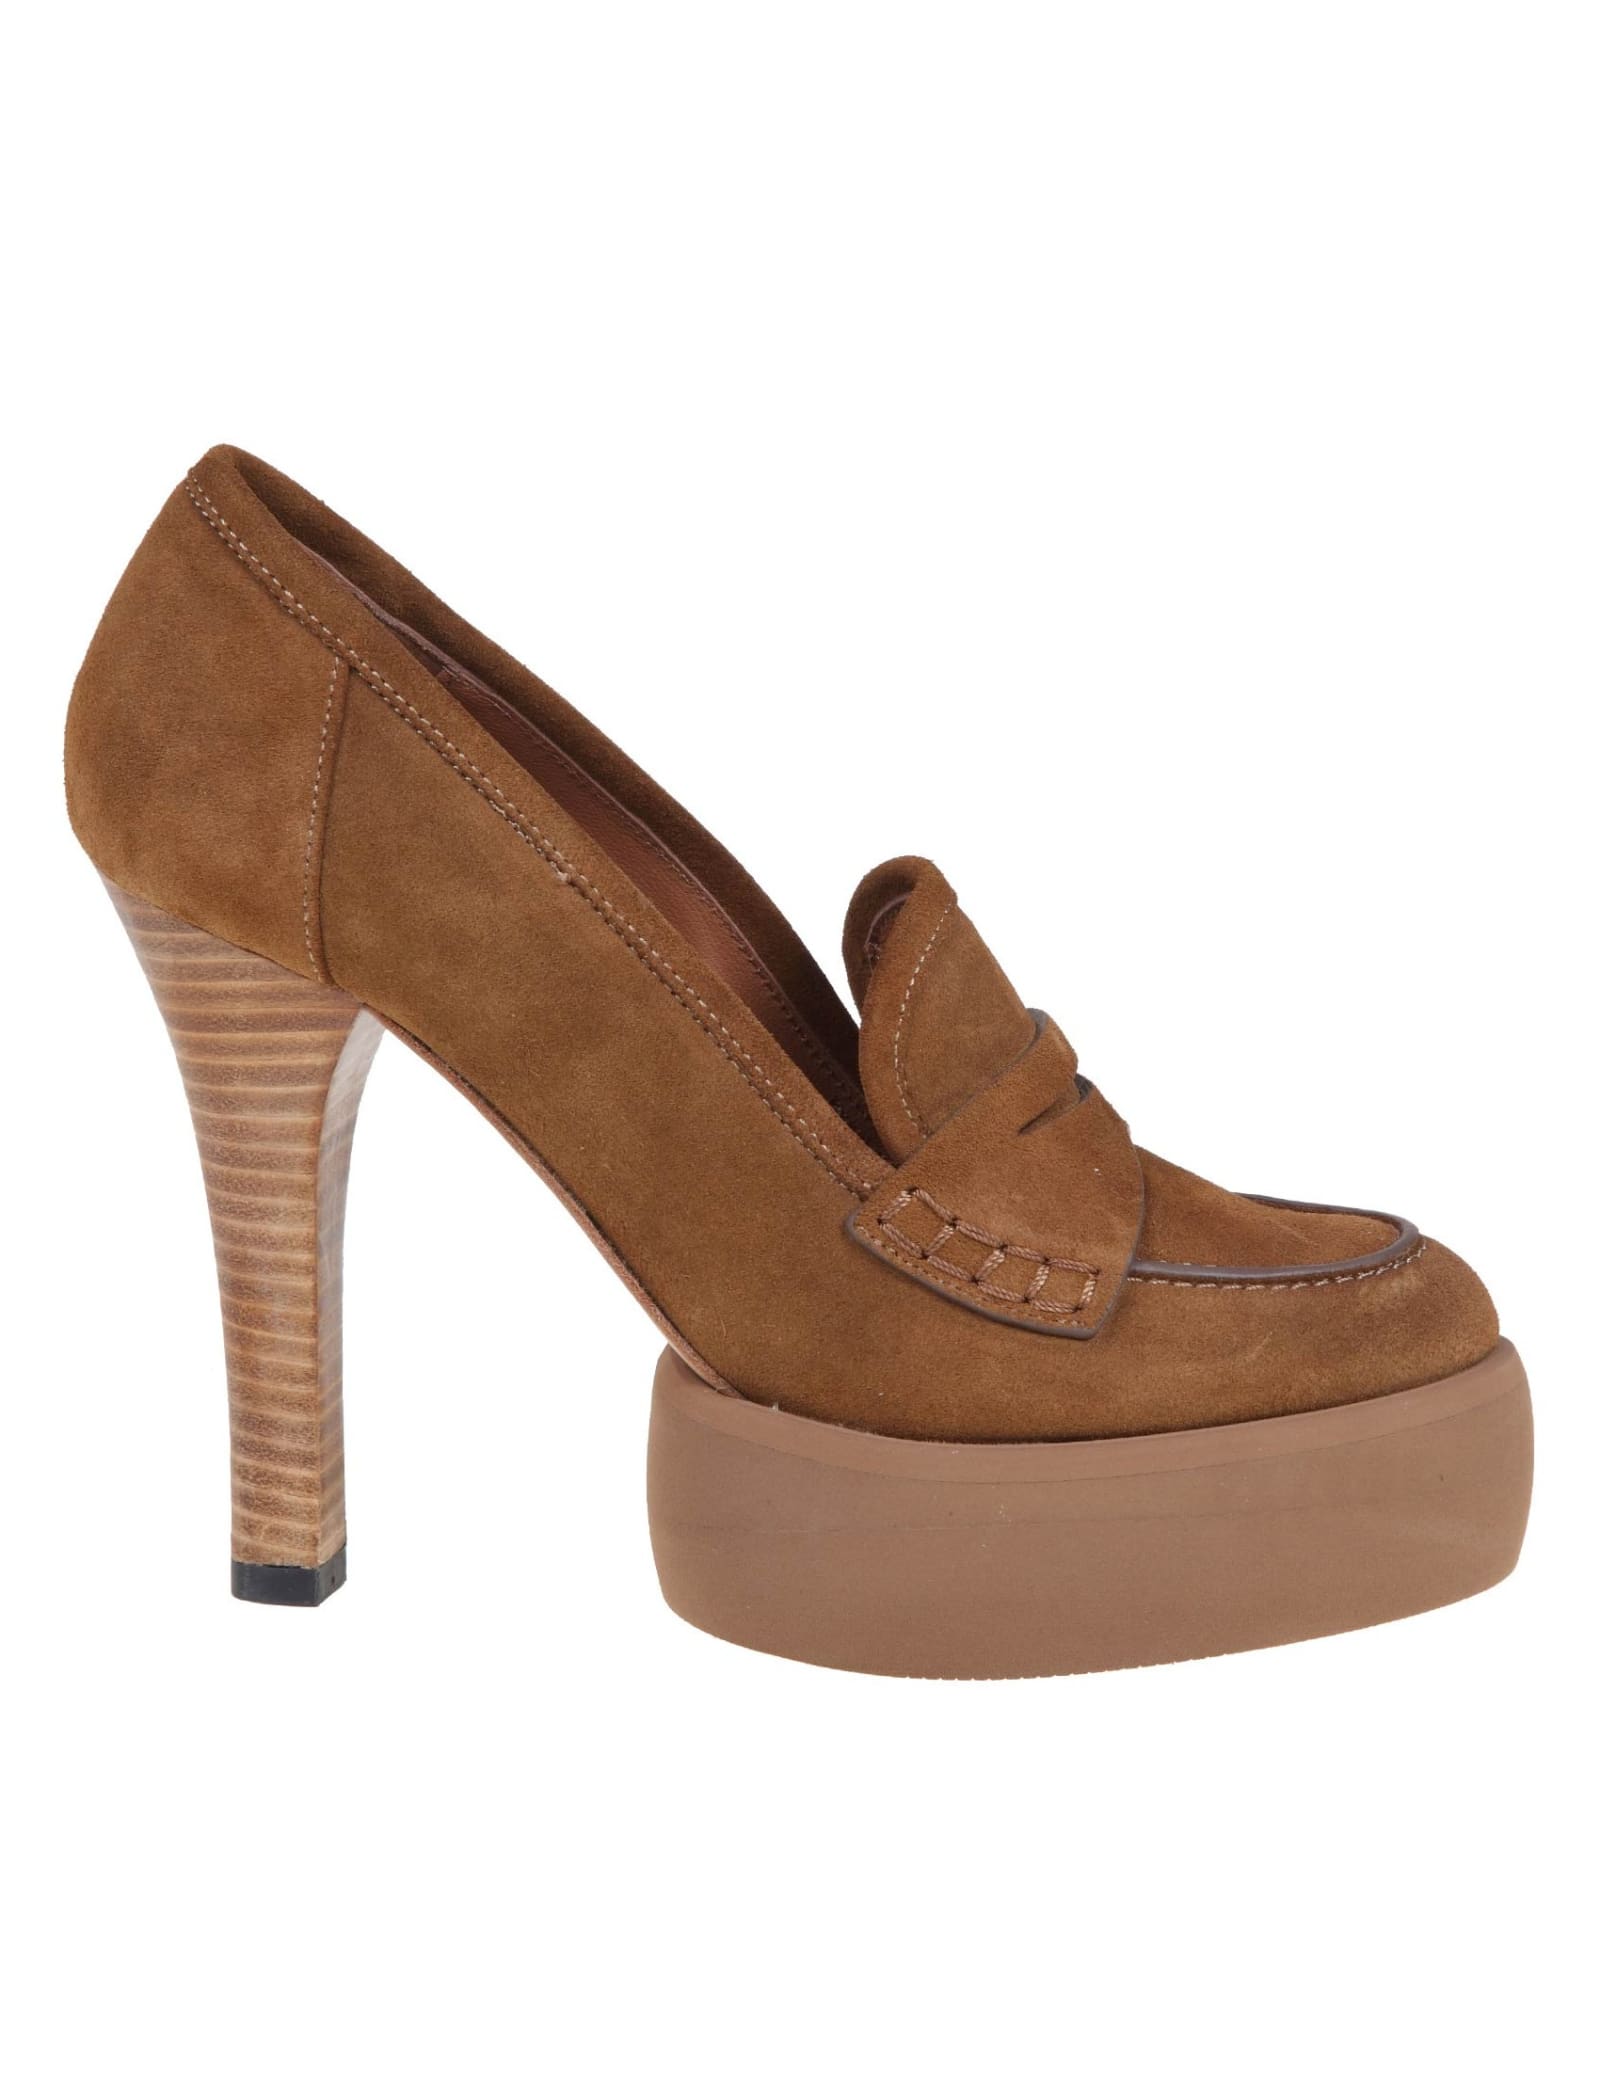 PALOMA BARCELÓ MABEL MOCCASIN IN WALNUT COLOR SUEDE